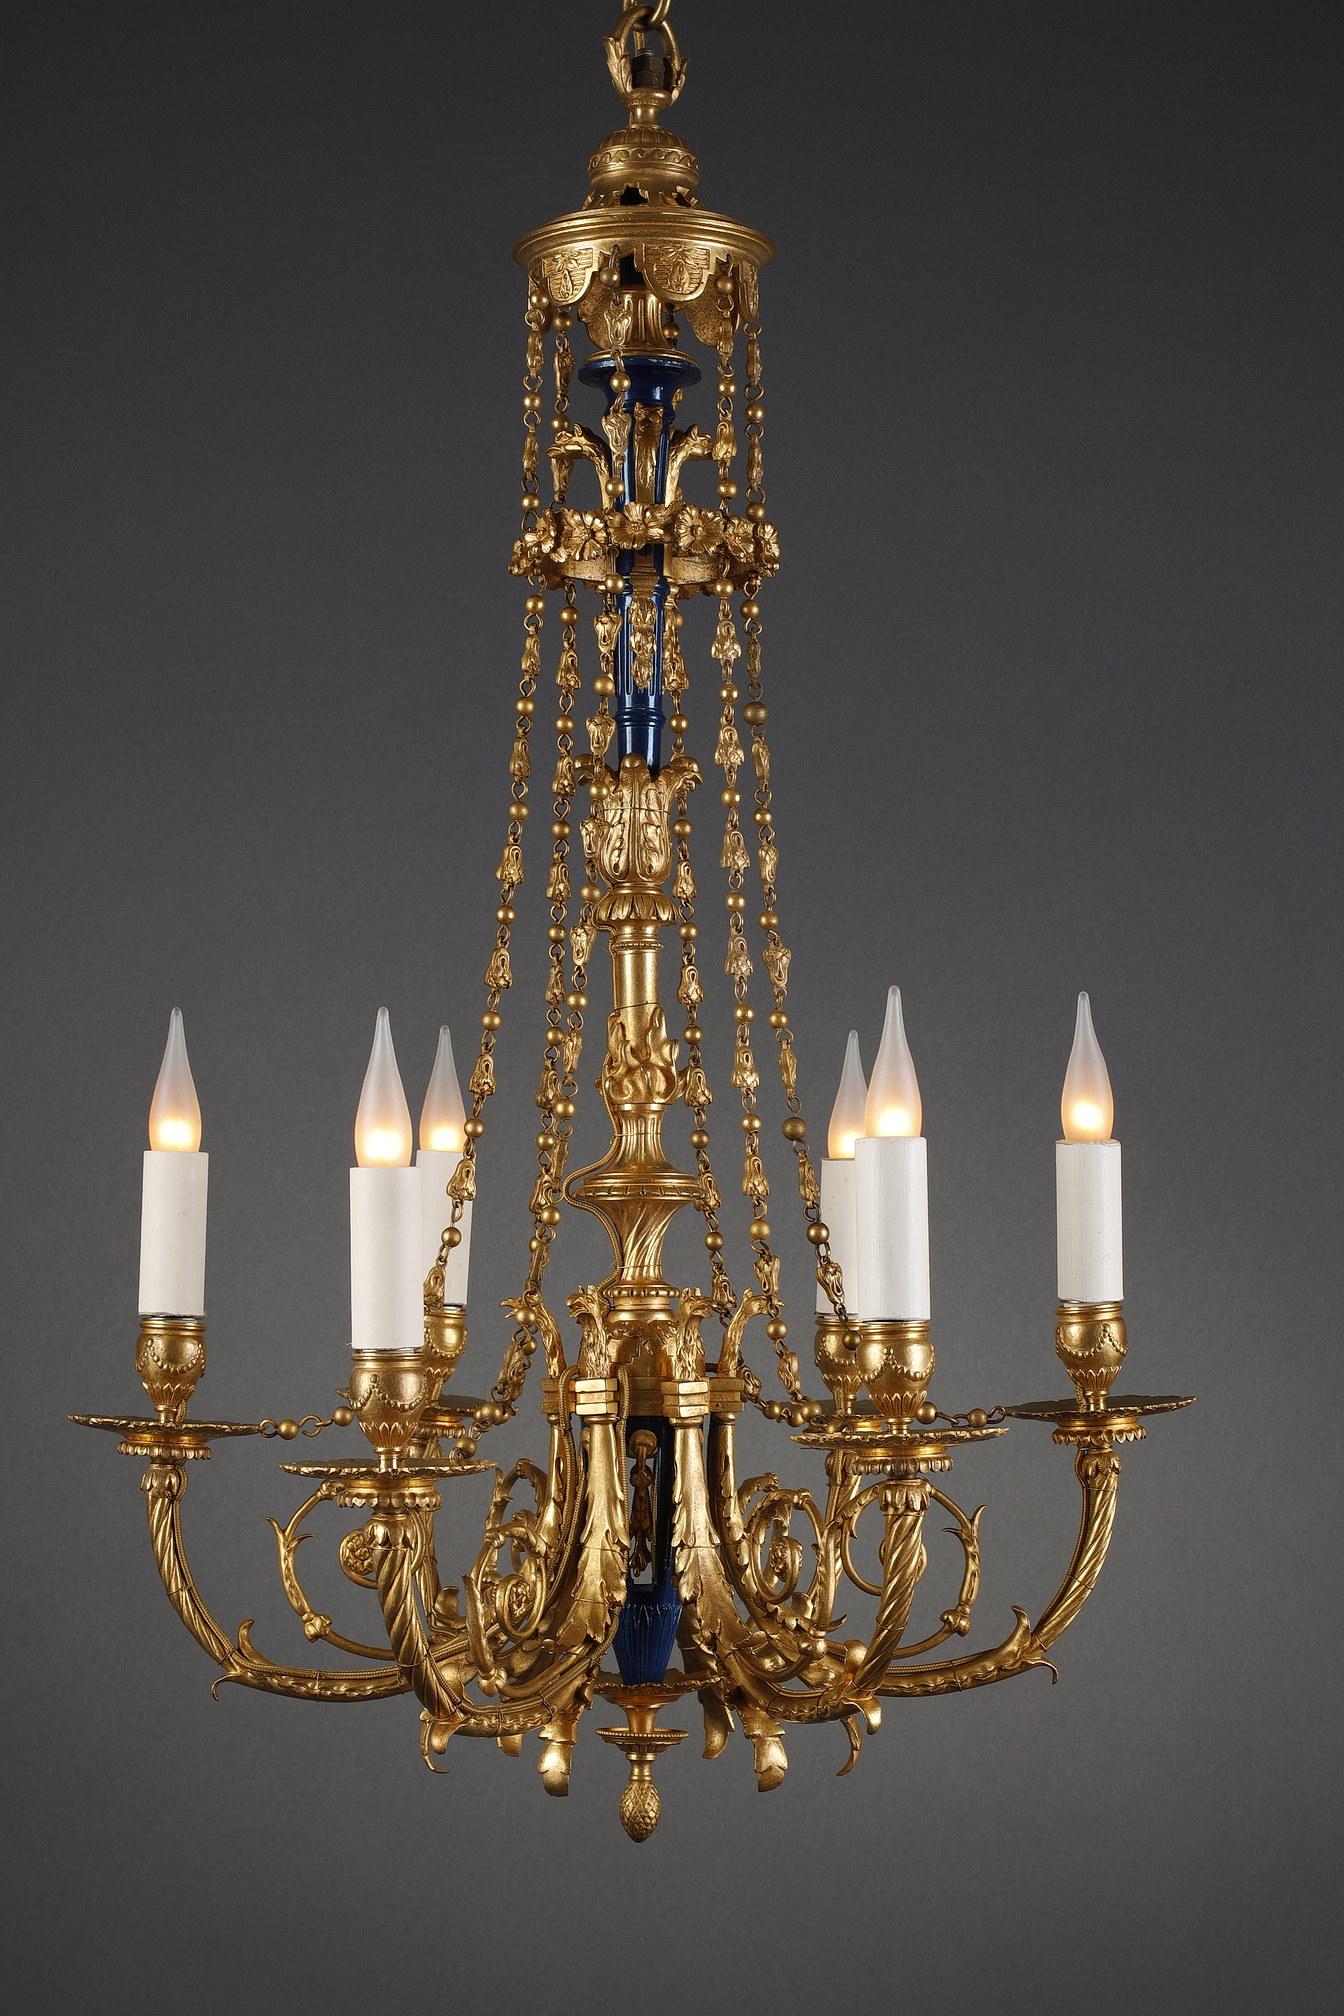 Charming Louis XVI-style chandelier in gilded bronze with six lights. The baluster-shaped central shaft, in gilded bronze and blue enamel is richly adorned with griffins heads, foliage and flames. It is lit by six light arms surmounted by griffins